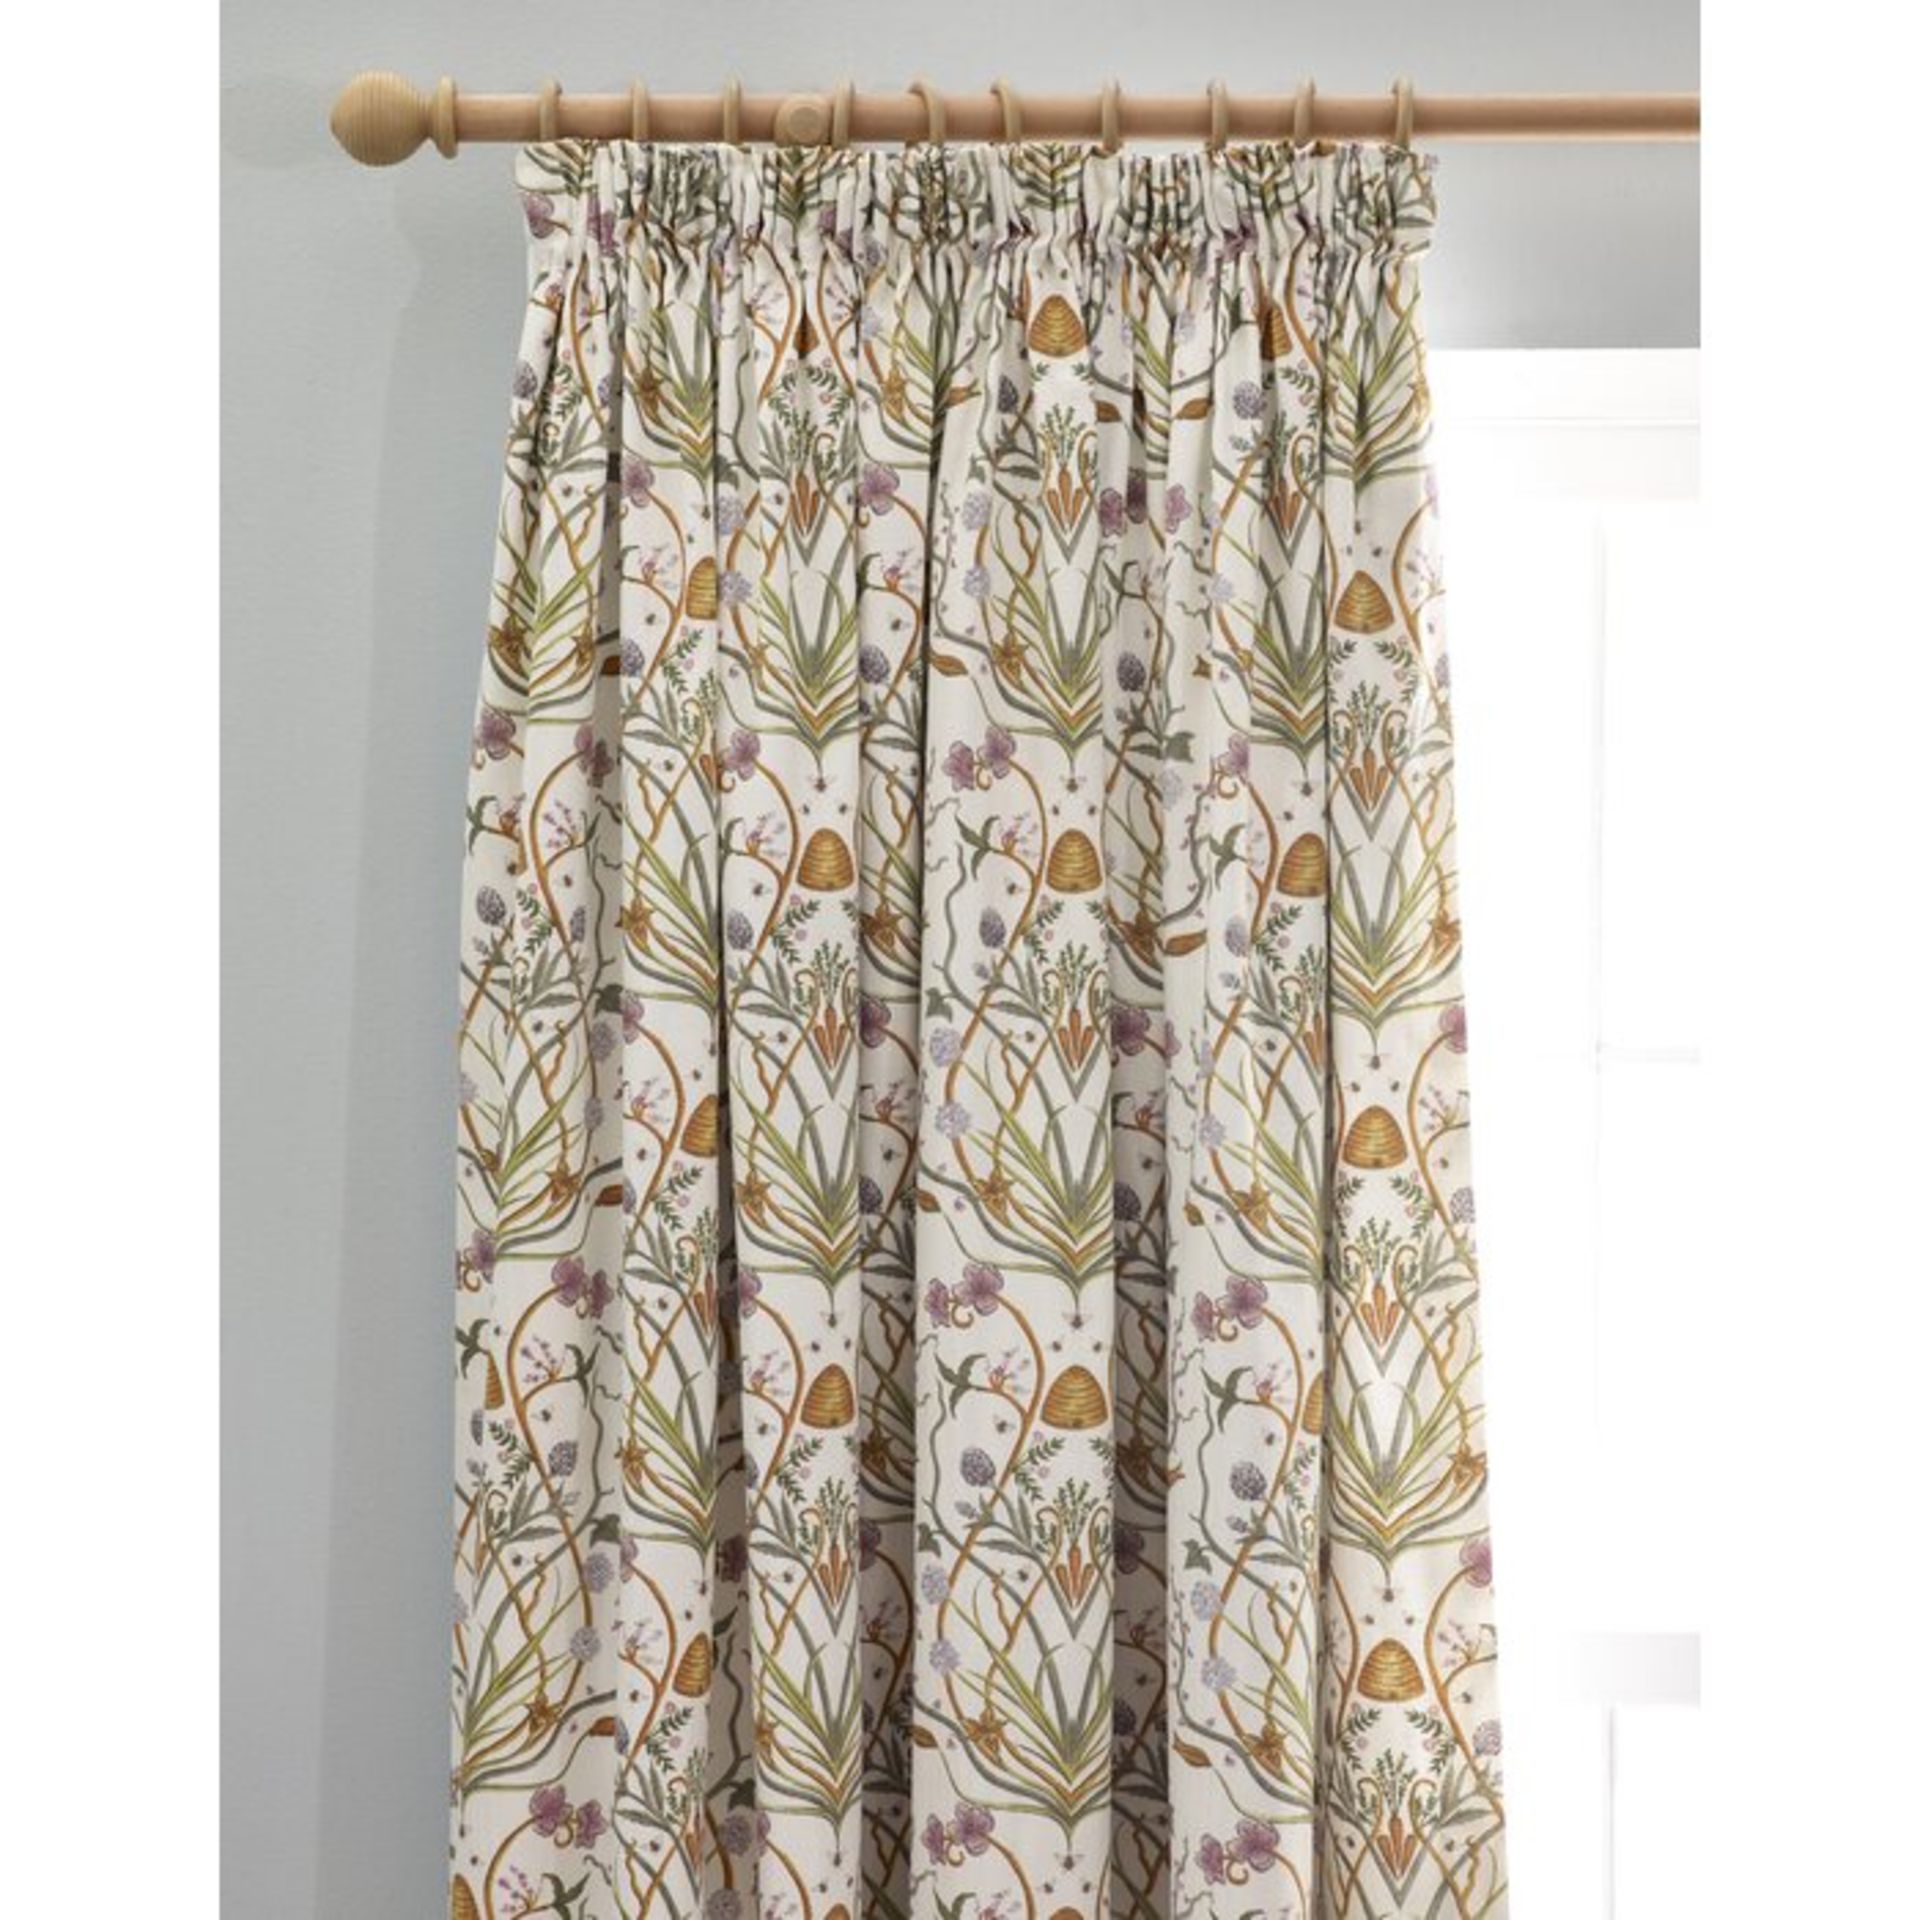 Potagerie Pencil Pleat Room Darkening Curtains - RRP £101.99 - Image 2 of 2